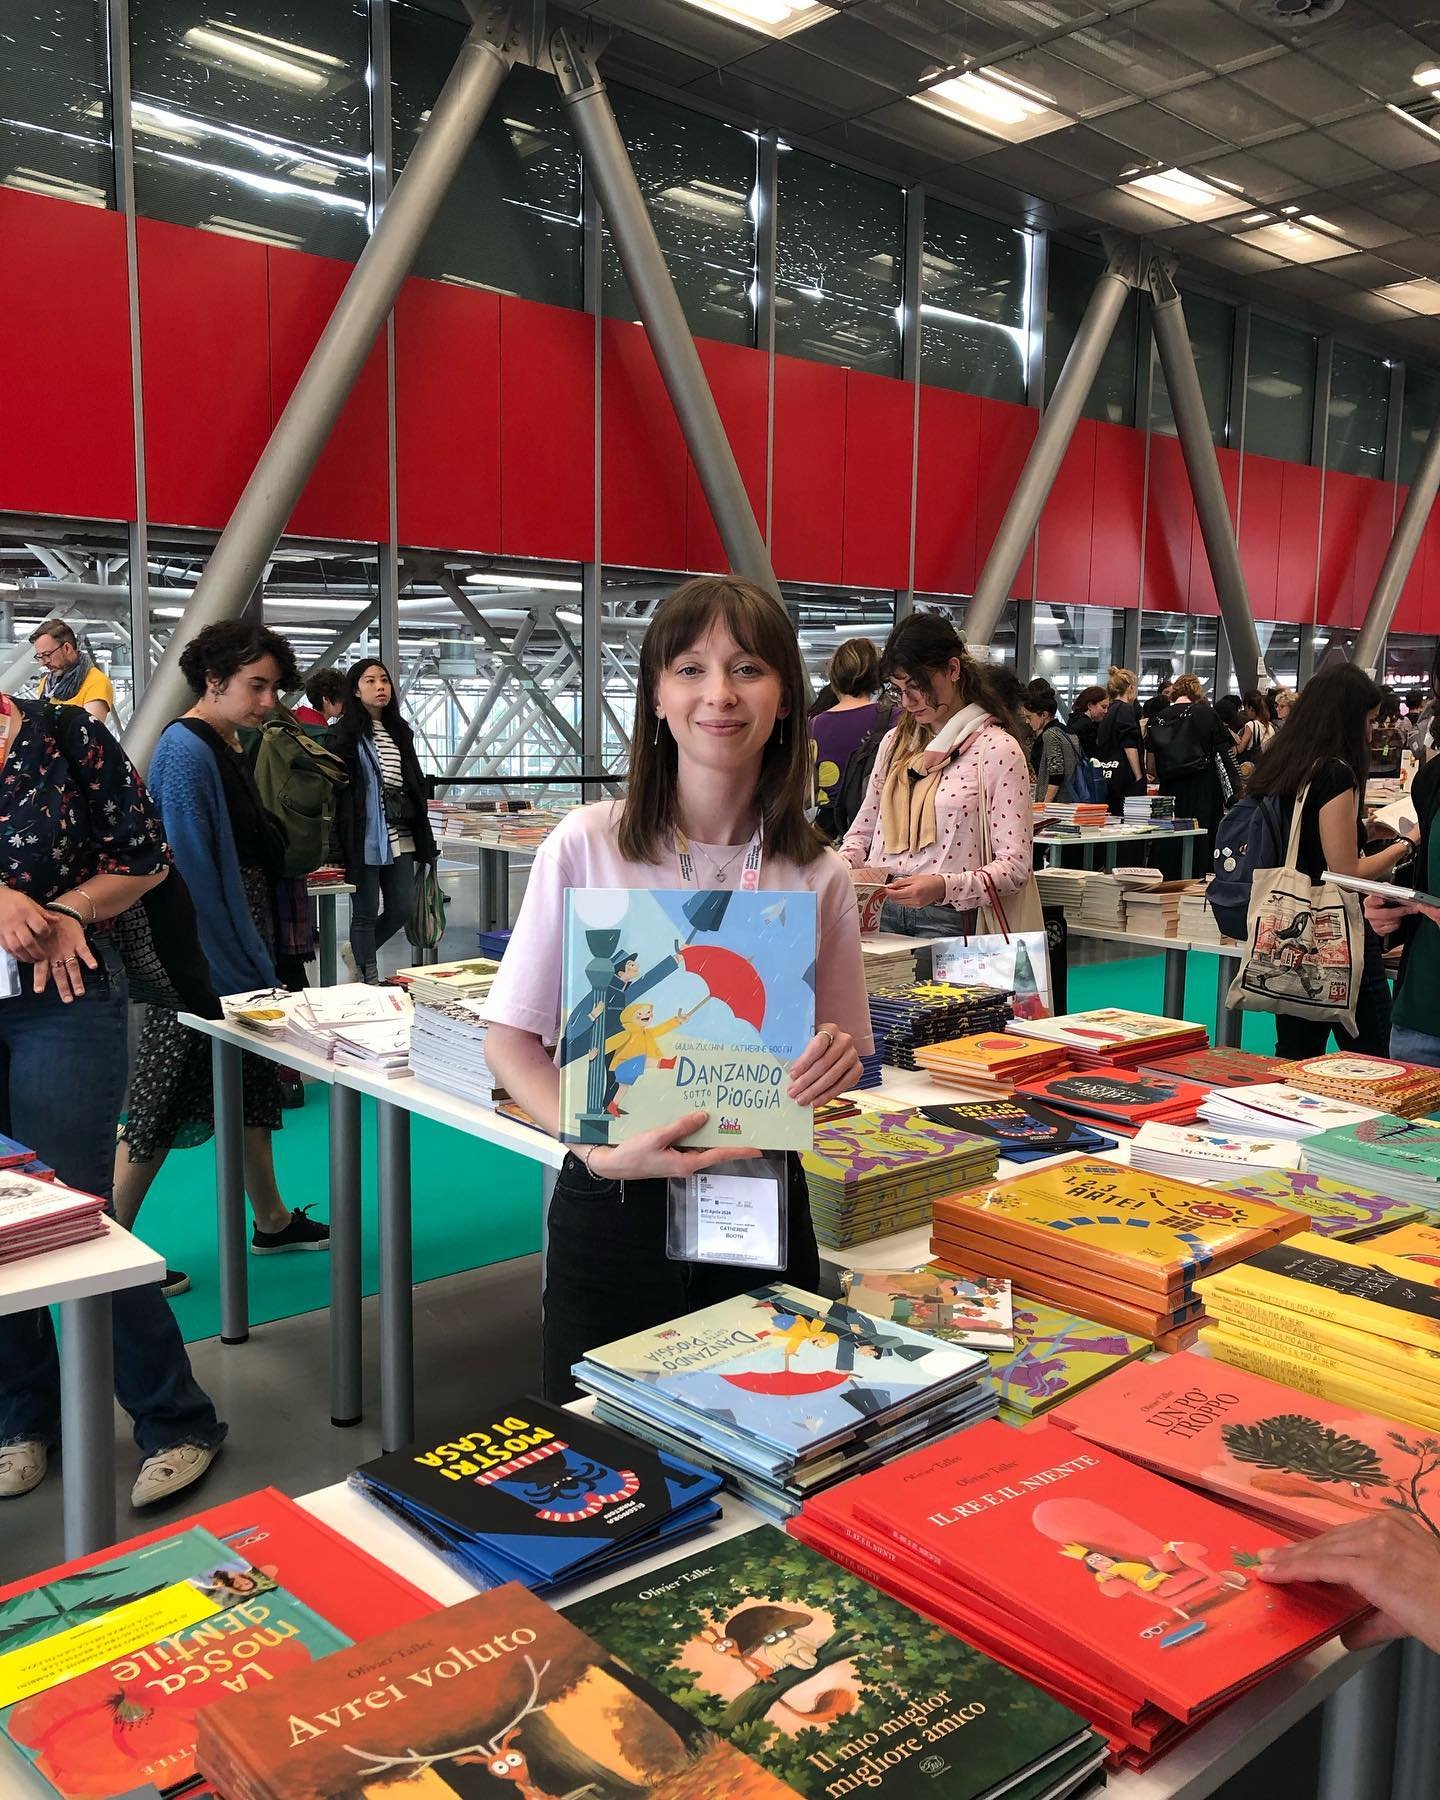 🧡 Day One of @bolognachildrensbookfair 🧡

What can I say? It&rsquo;s been magical seeing my illos at the book fair. Only a year ago @la.zuc and I were pitching this book at the fair, lugging my portfolio around to as many stalls as we could. And no